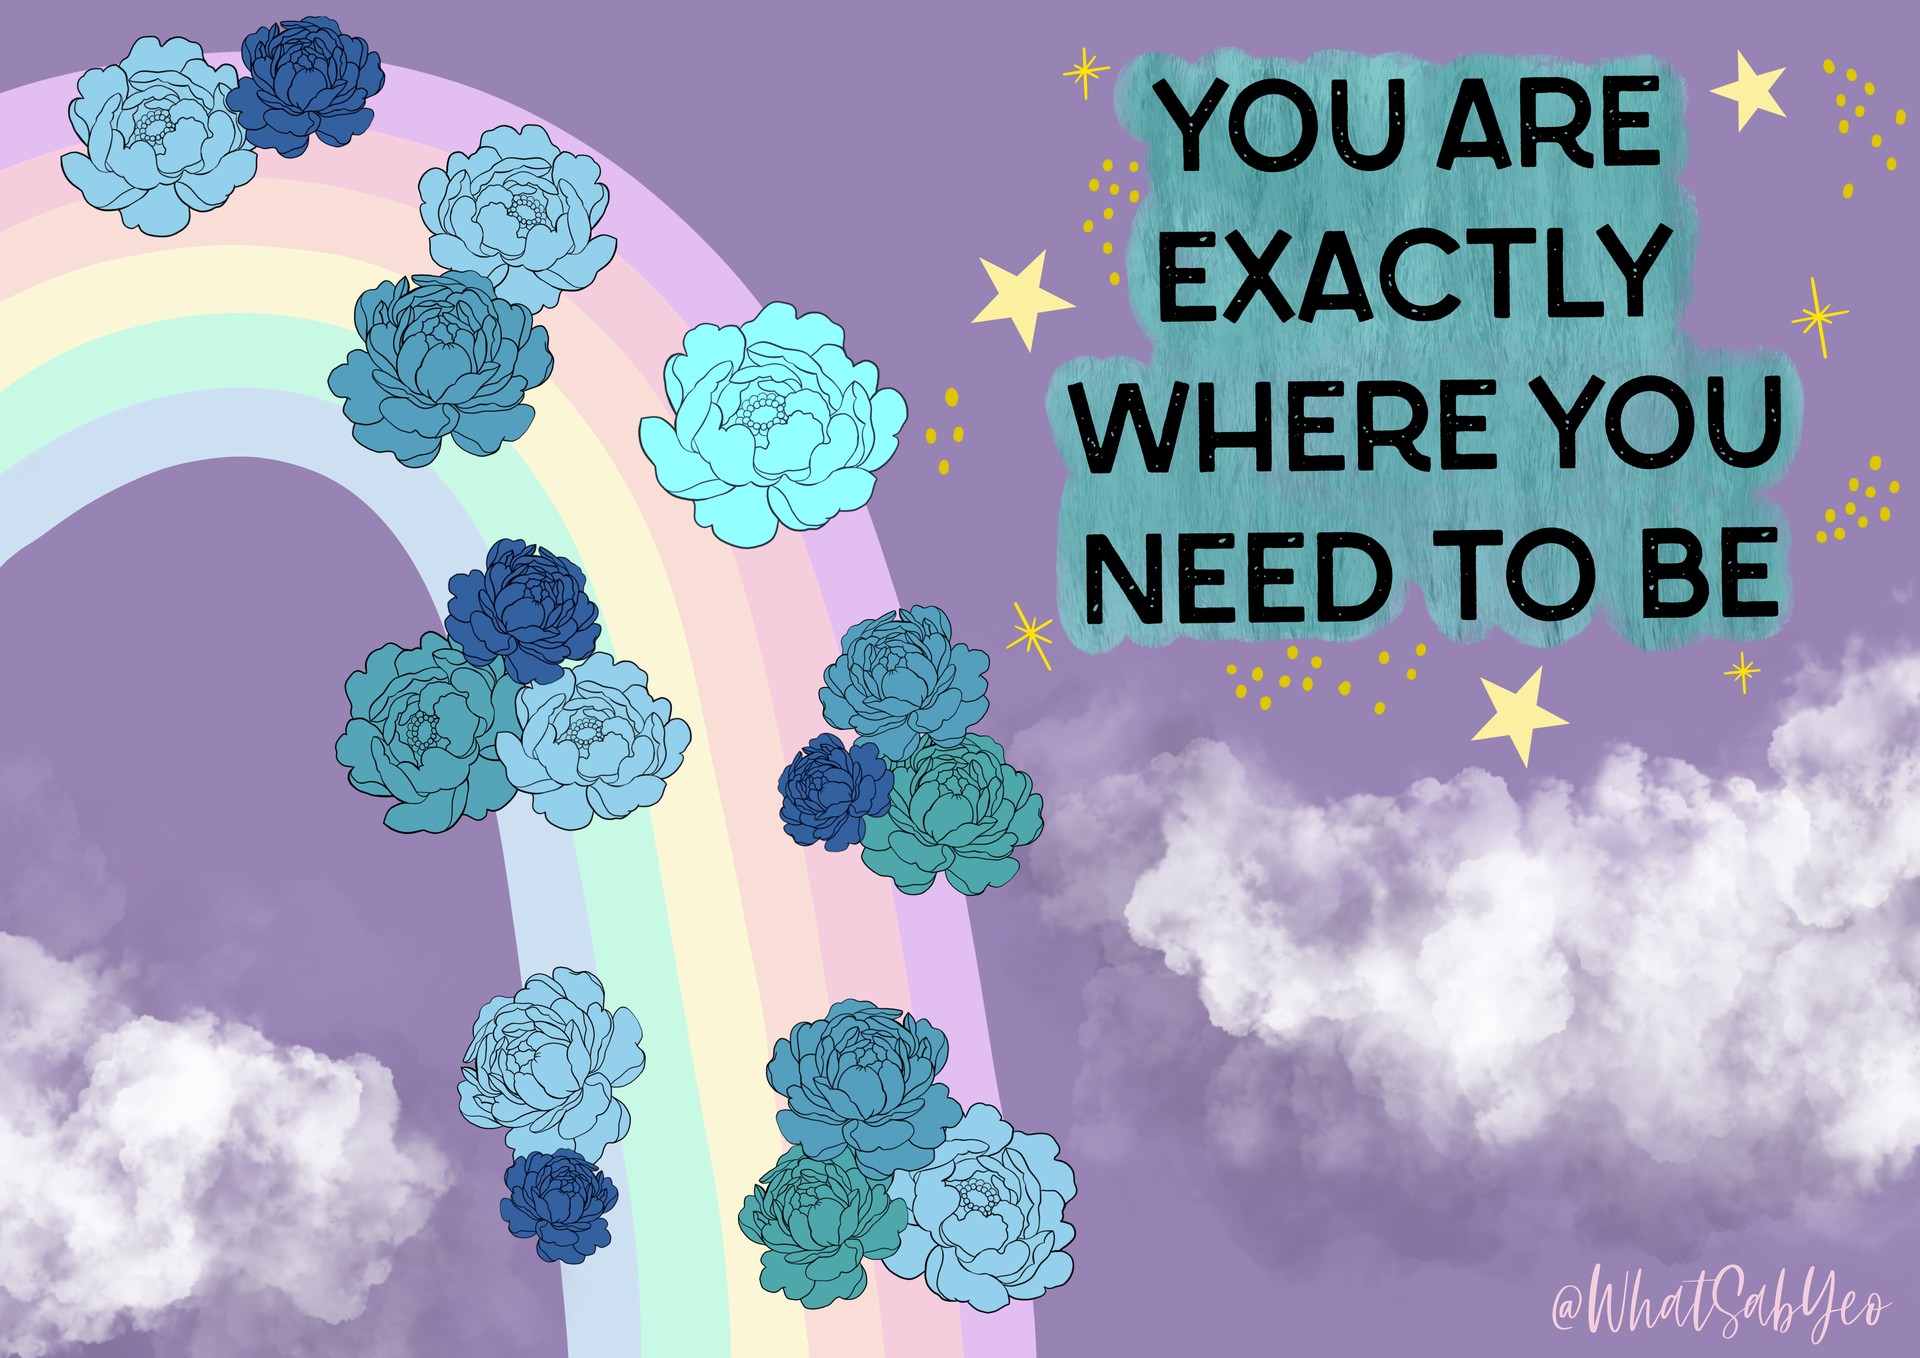 You are exactly where YOU need to be